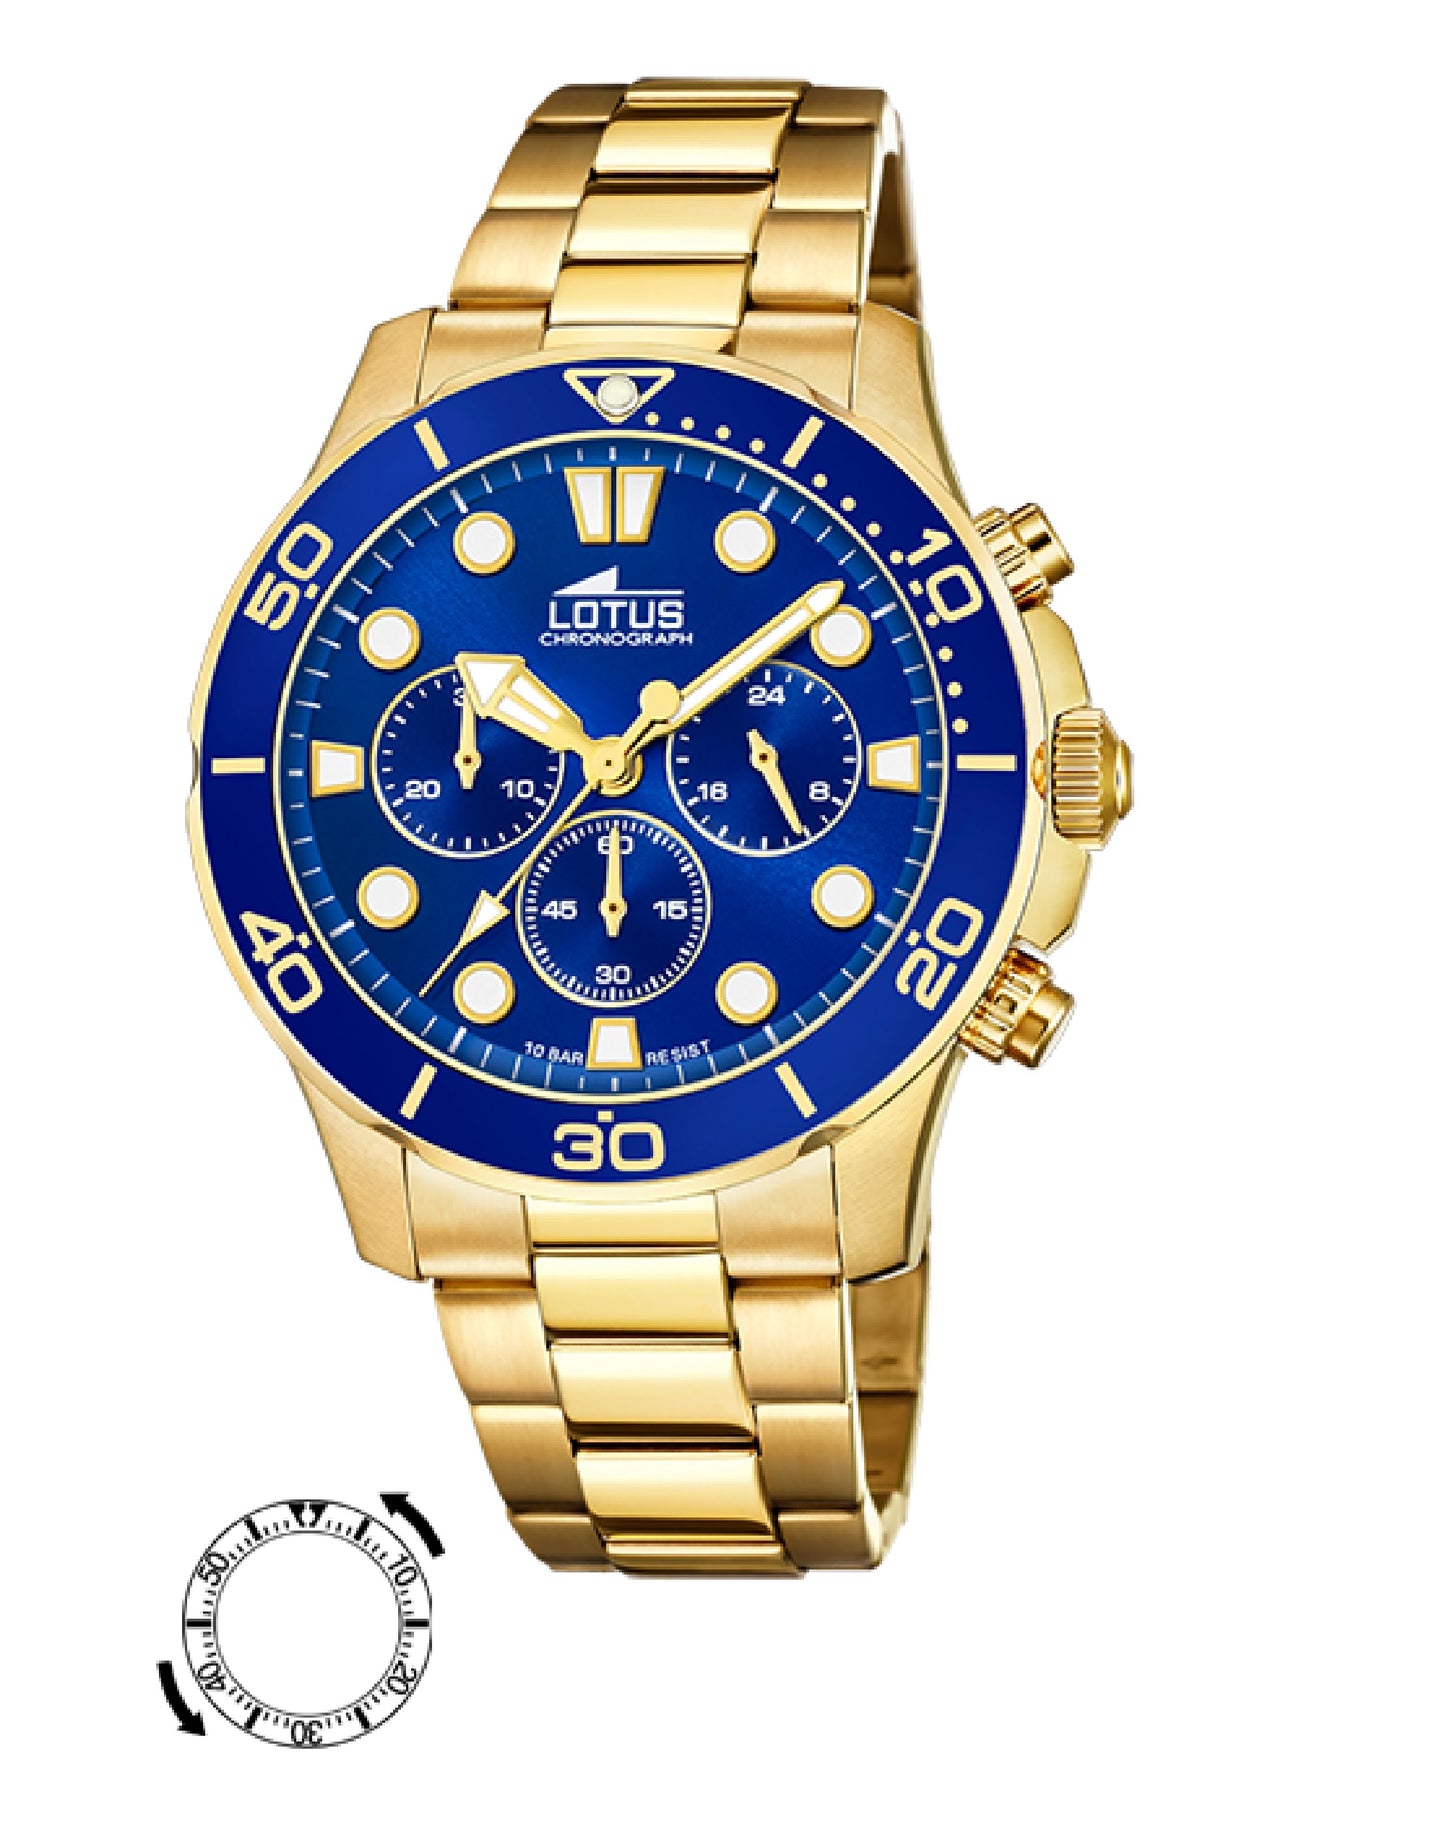 N CASE YELLOW WITH Diamonds GOLD PLATED BLUE Diamonds & – 44.50MM 18757/1Lotus STRAP DIAL